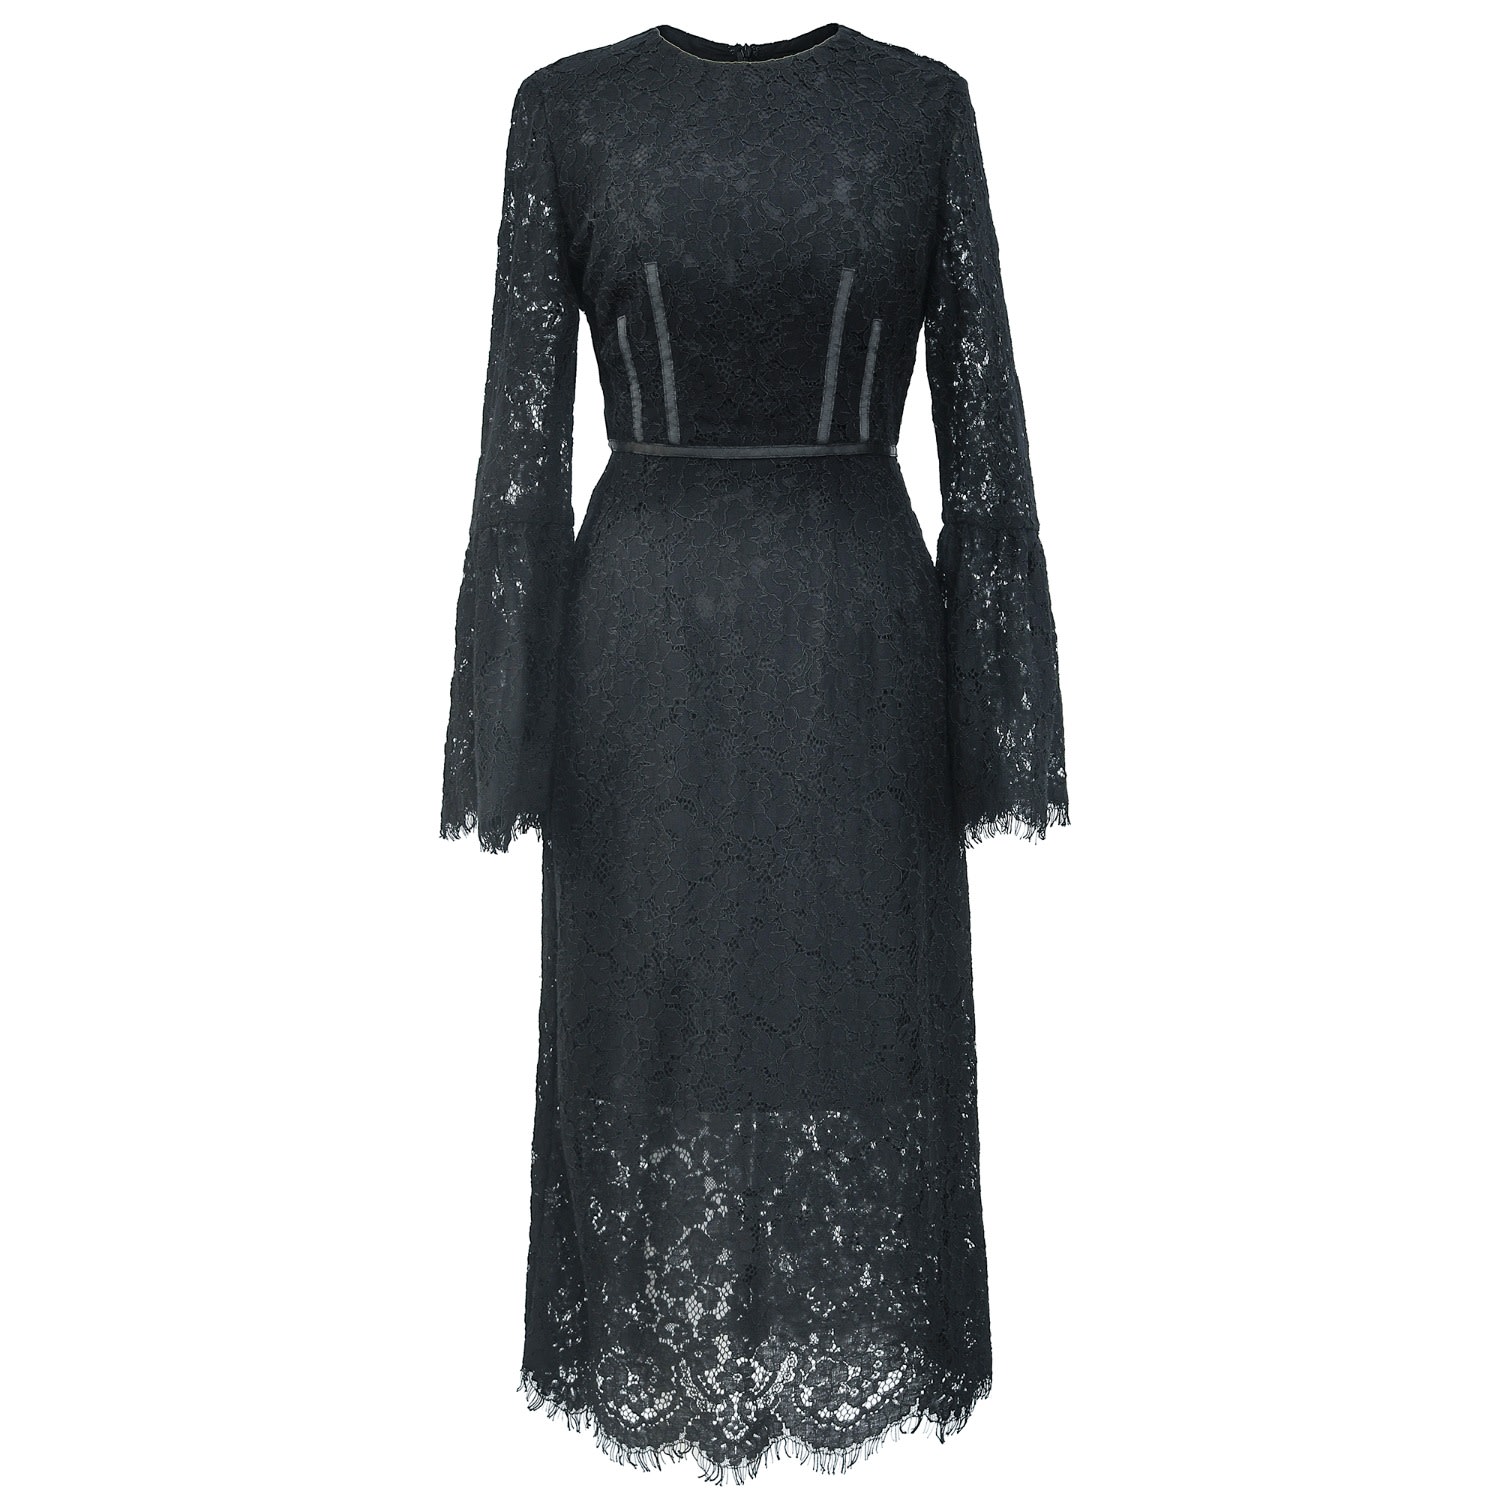 Women’s Bustier Lines And Tulip Sleeves Lace Dress - Black Medium Smart and Joy